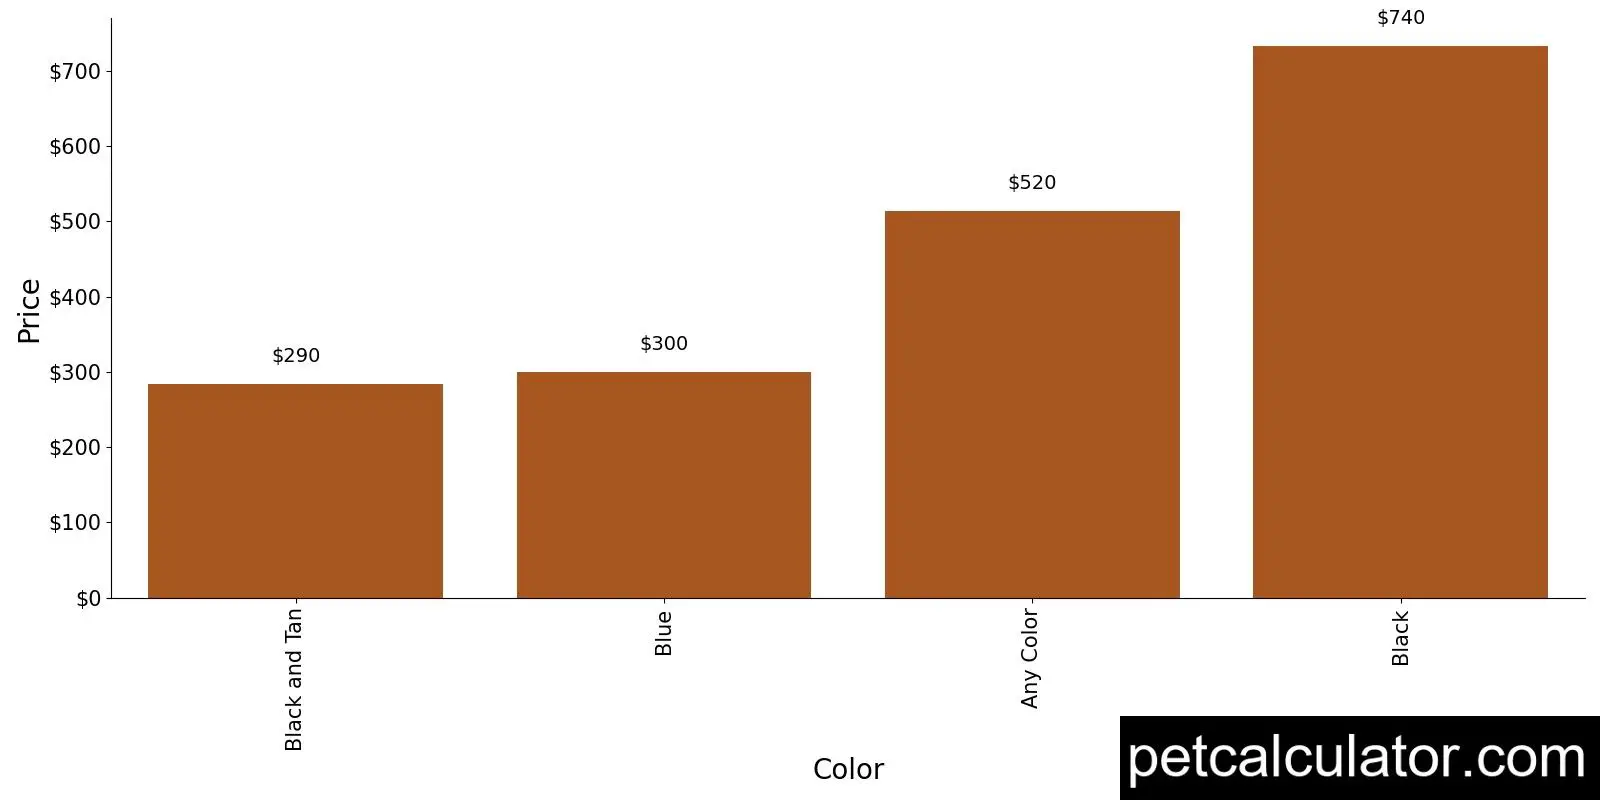 Price of Black and Tan Coonhound by Color 